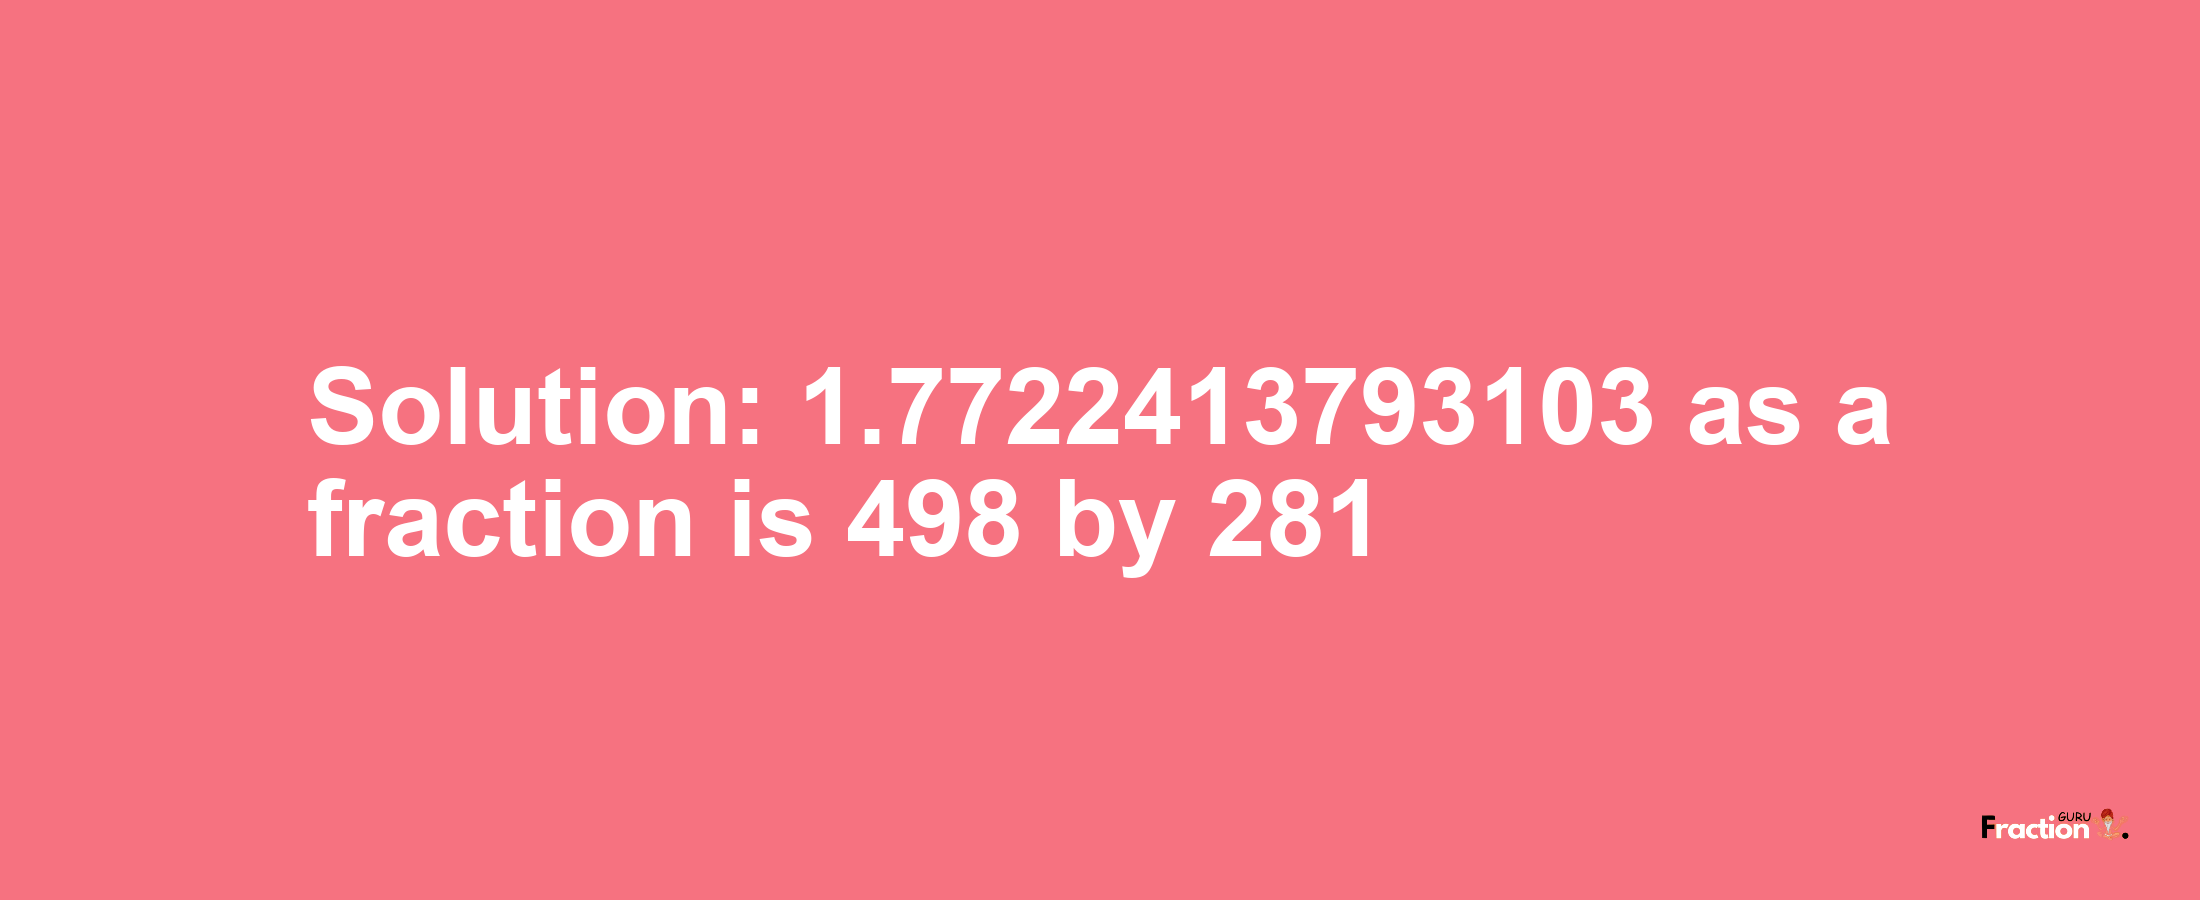 Solution:1.7722413793103 as a fraction is 498/281